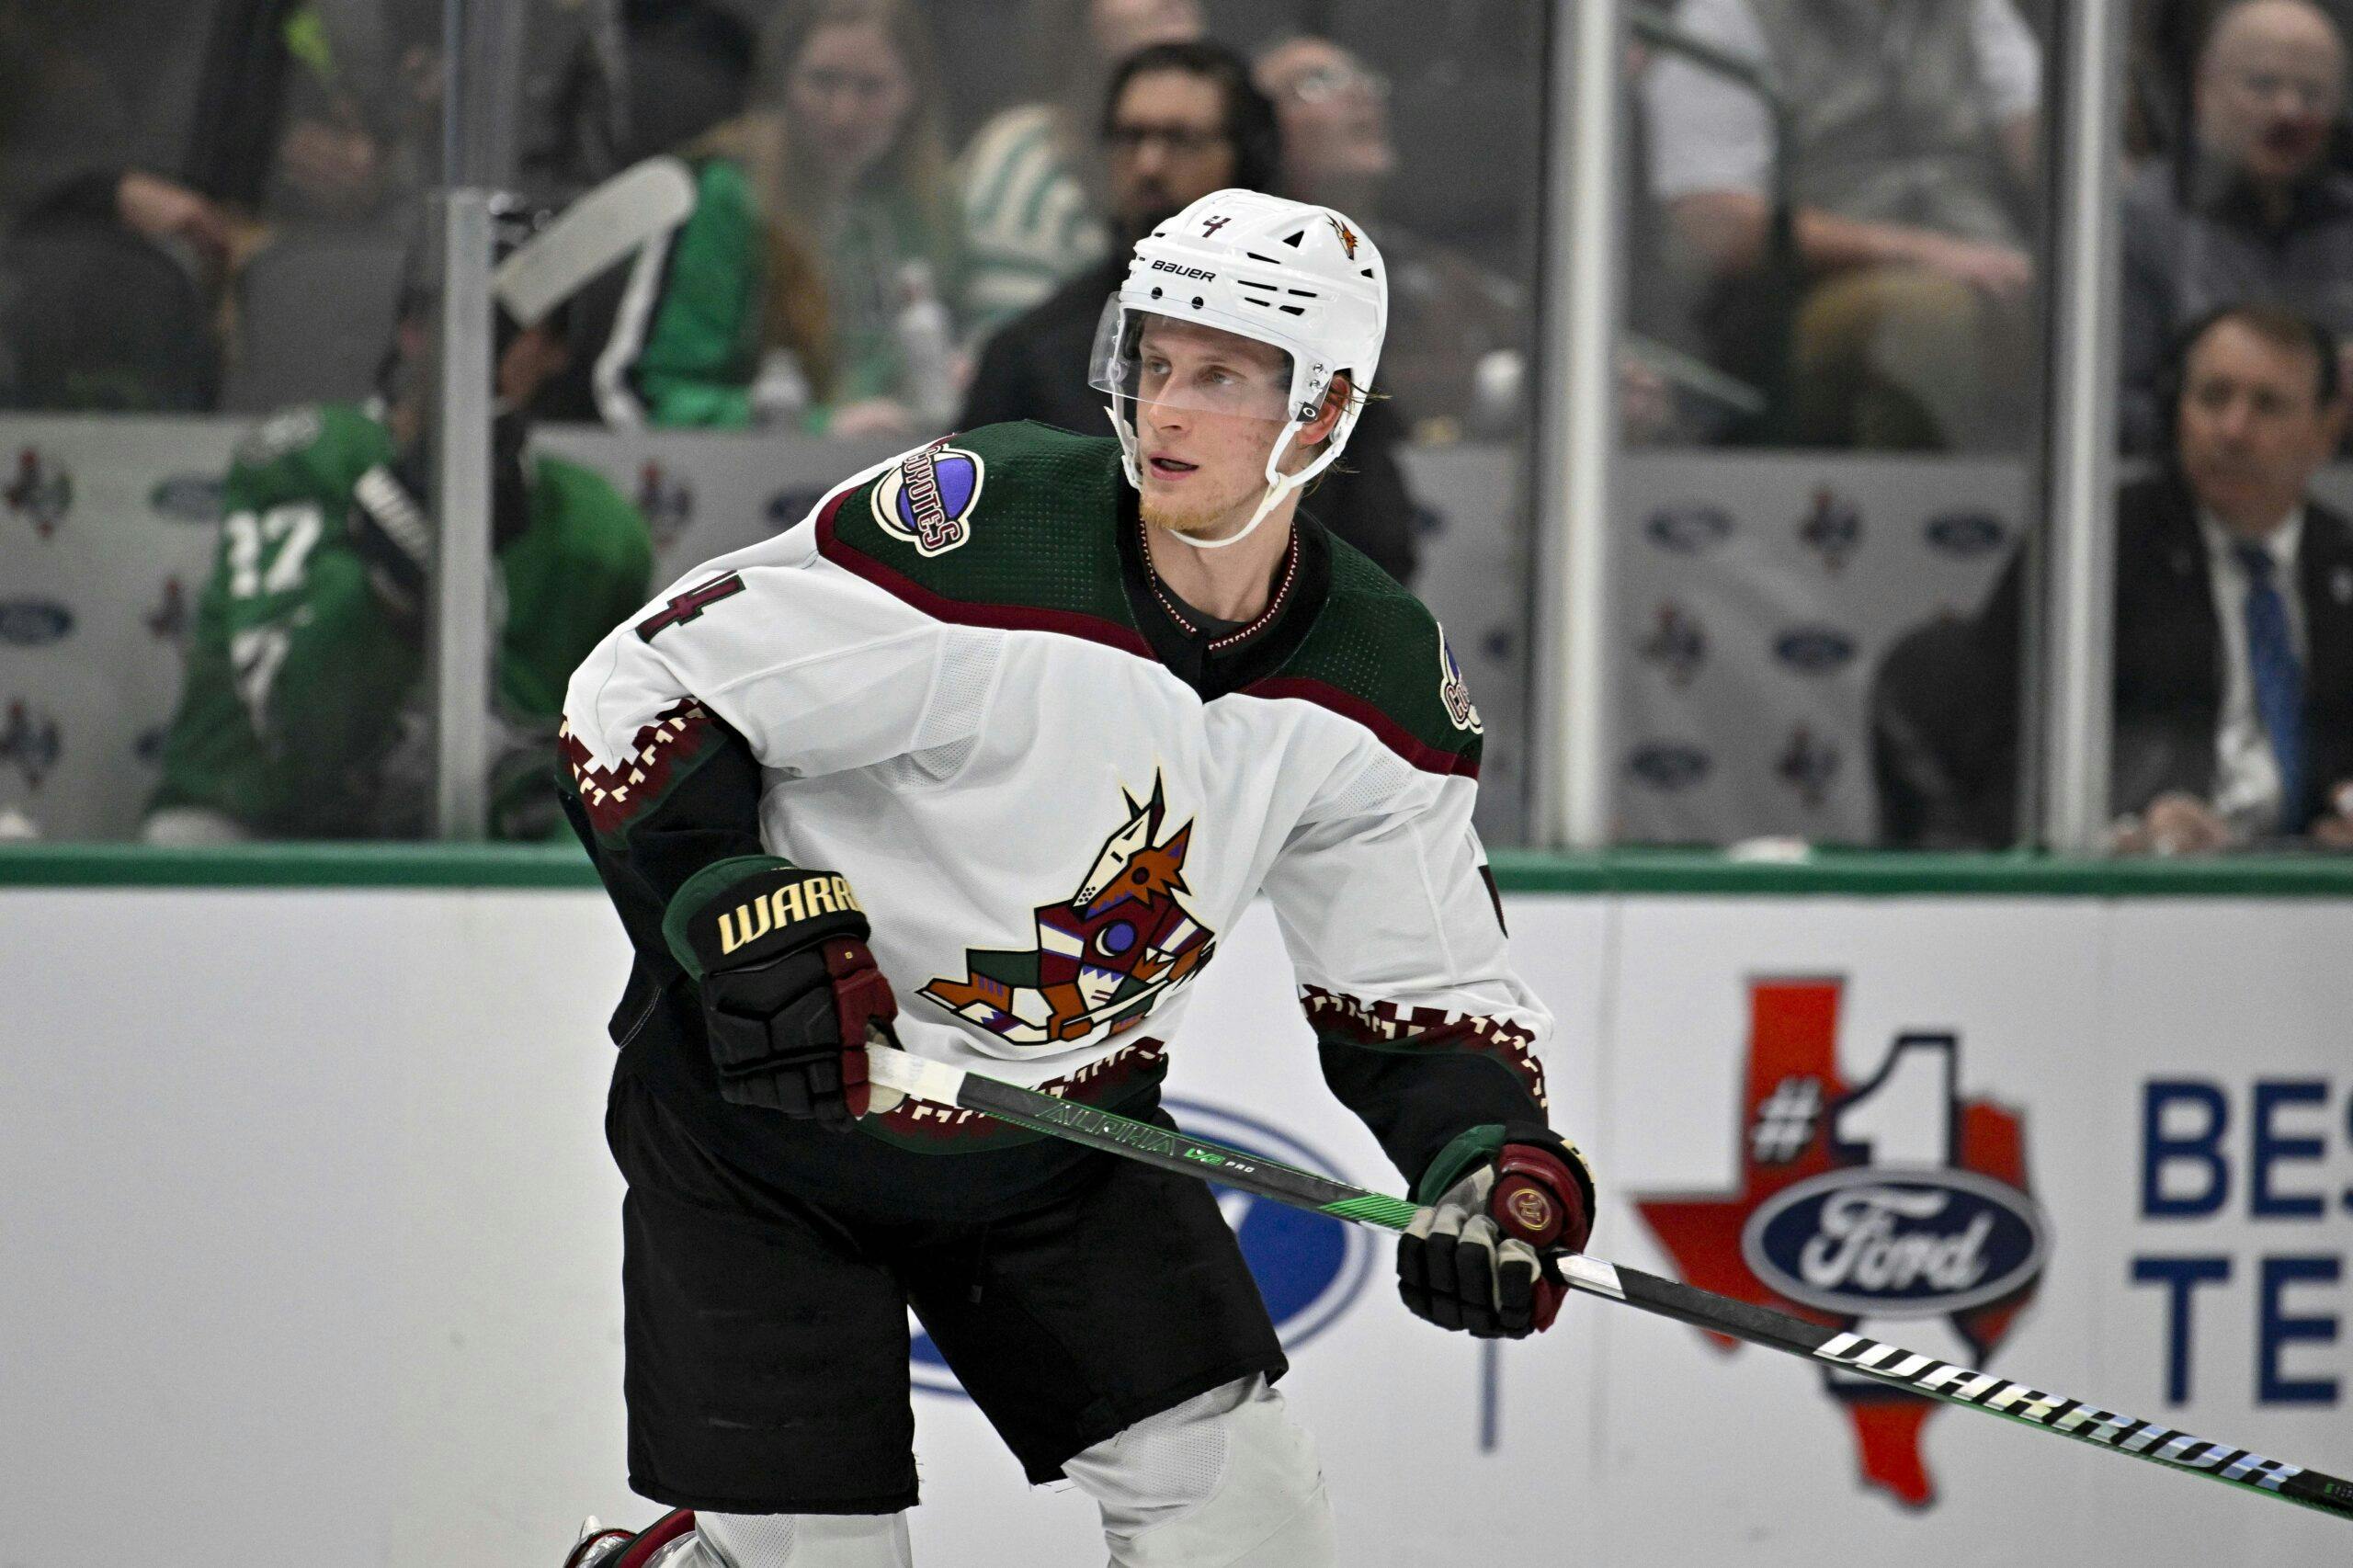 Utah HC re-signs defenseman Juuso Valimaki to two-year contract